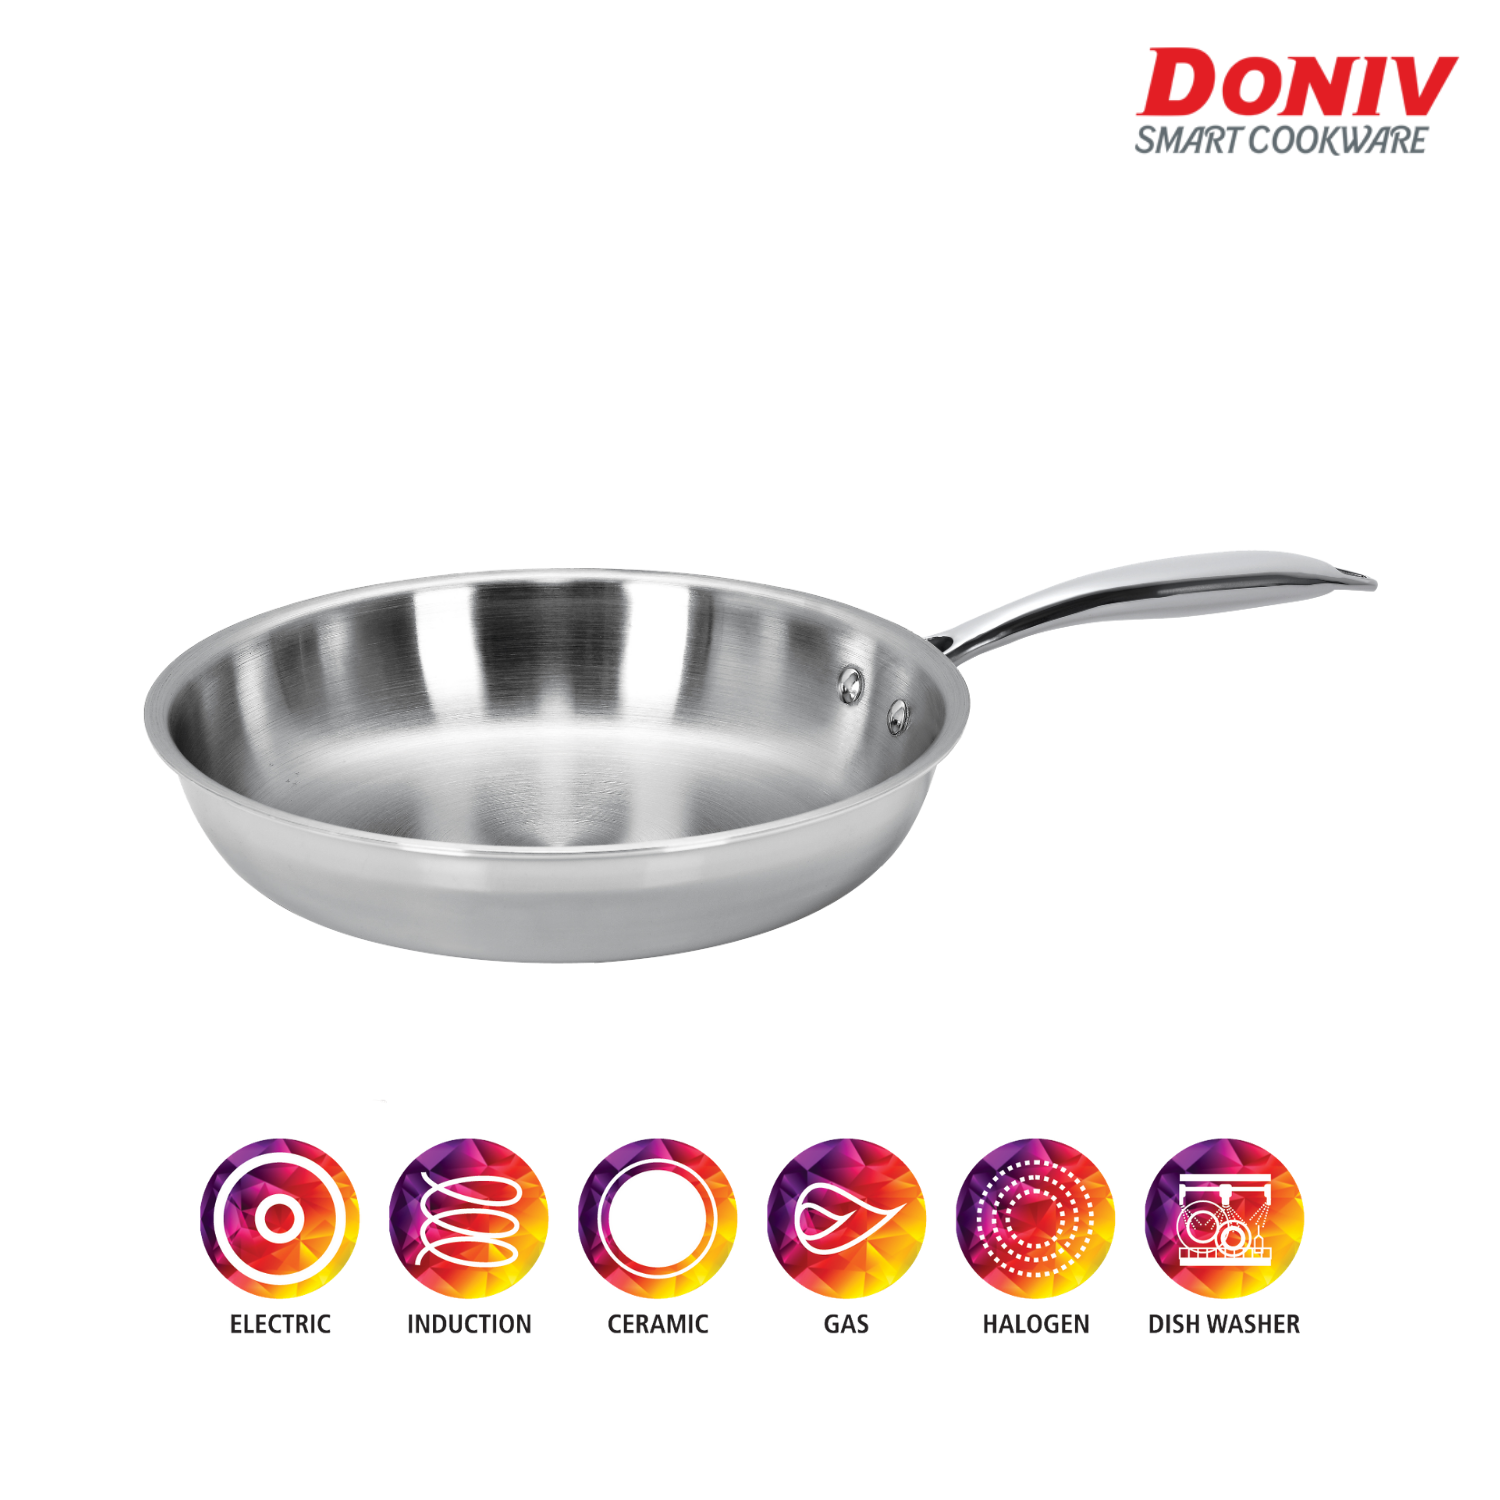  Induction Friendly"		"https://www.swastiketrades.com/eCommerce-Image/Cookware/Cookware/Fry%20Pan/Vinod%20Doniv%20Triply%20Frypan%2026%20cms/Main.png